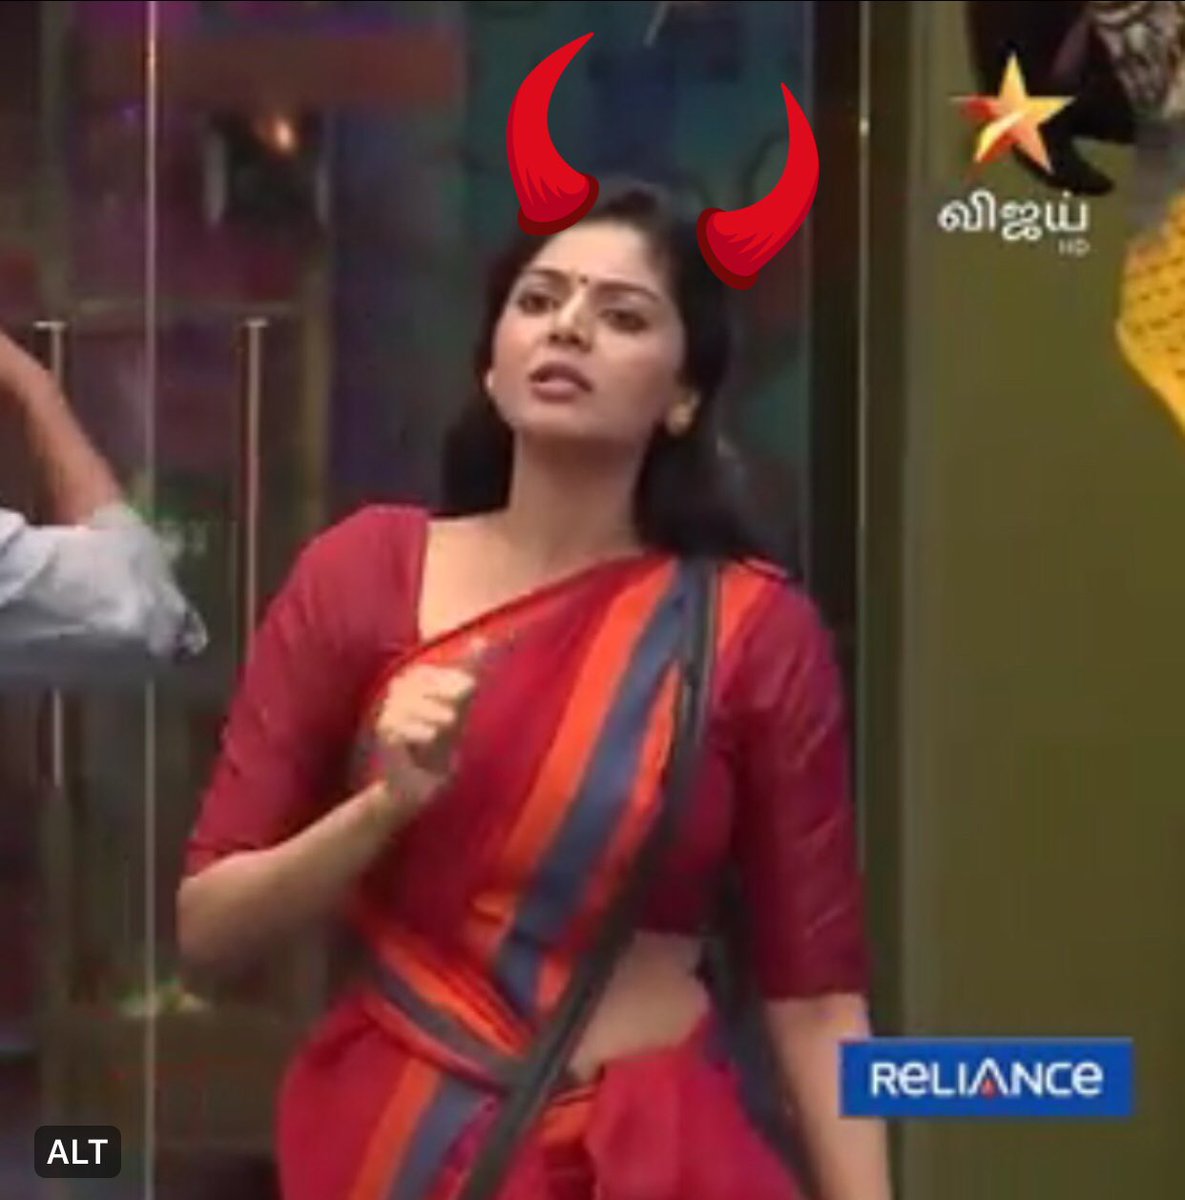 @vijaytelevision This Tharudala #Sanam wanted to start a issue with #Balaji and later play a victim card but she failed since he did not give any damn about her ,

Yendi Tharudala why can’t you play your role with #Ramesh #Shivani and others ..

Balava NOTTAMA Unnala irukka mudiyadu.. thuuu ..